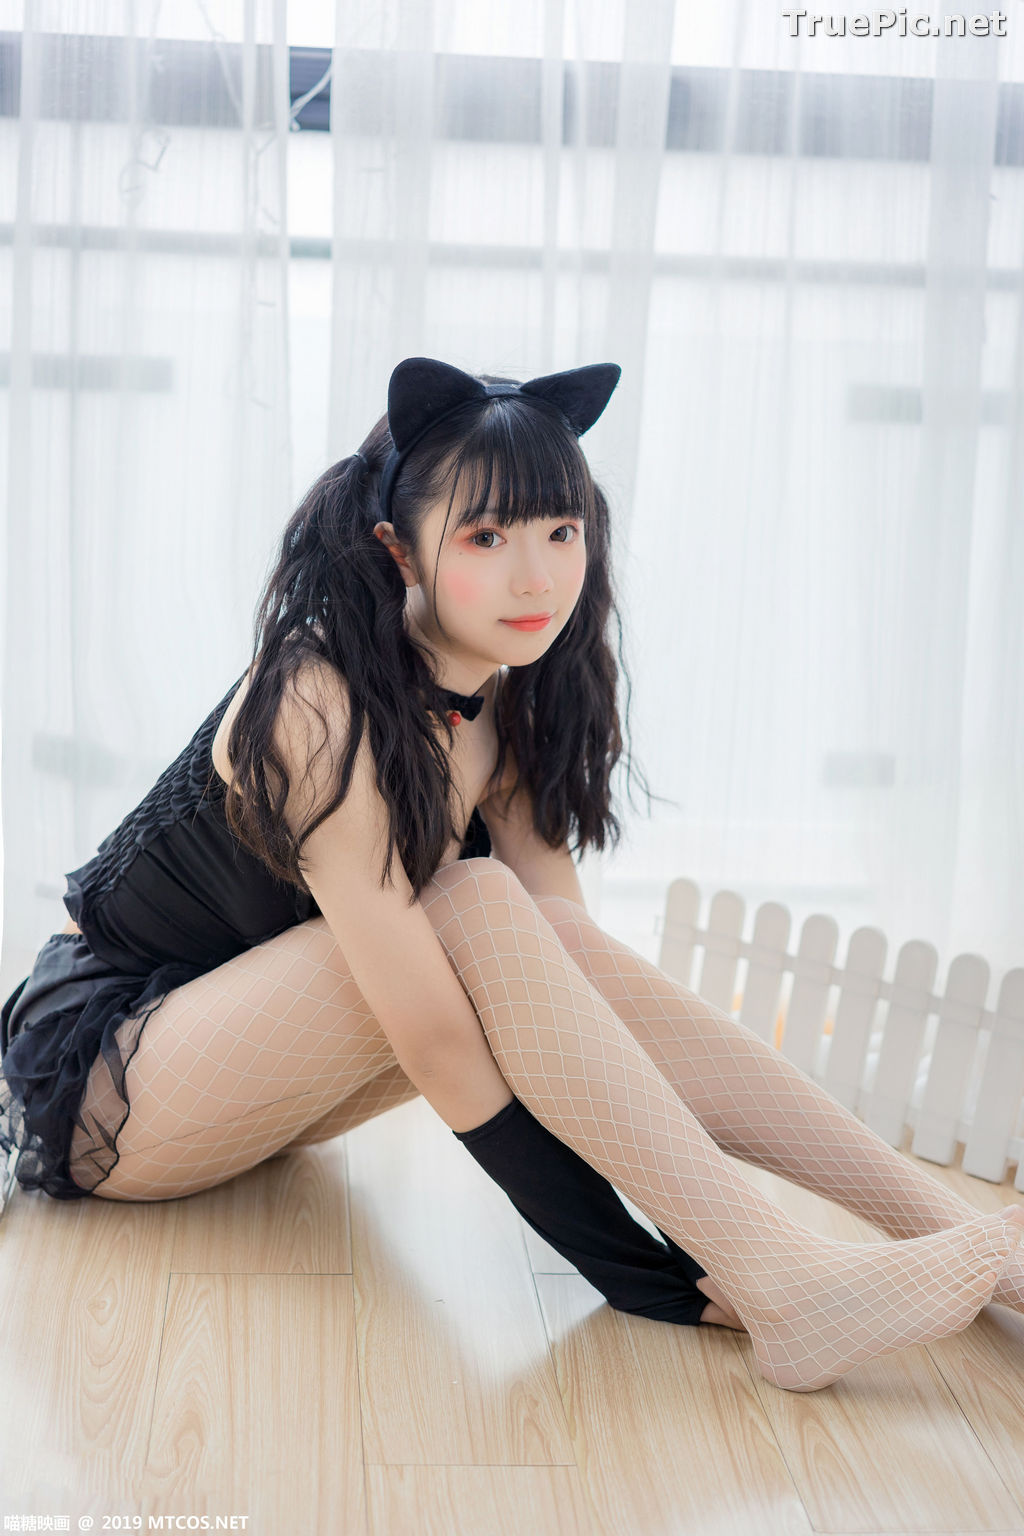 Image [MTCos] 喵糖映画 Vol.045 – Chinese Cute Model – Black Cat Girl - TruePic.net - Picture-23